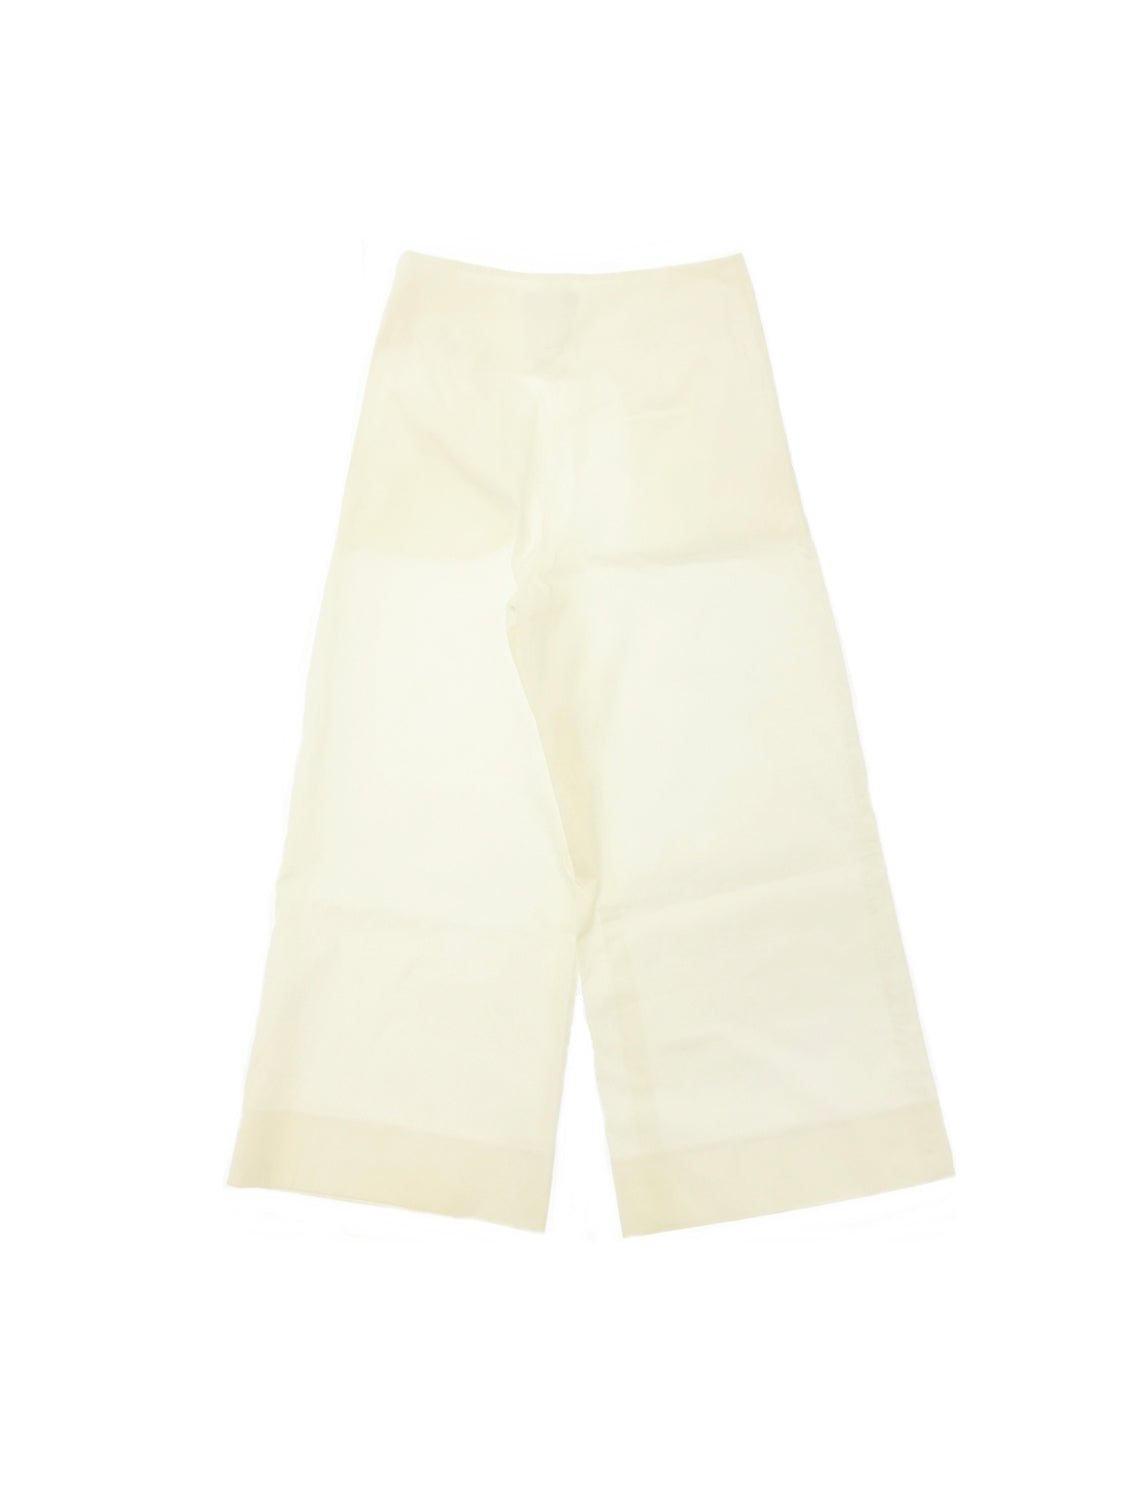 Chanel Pants In White With Organza on Top Size 40 Rare to Find